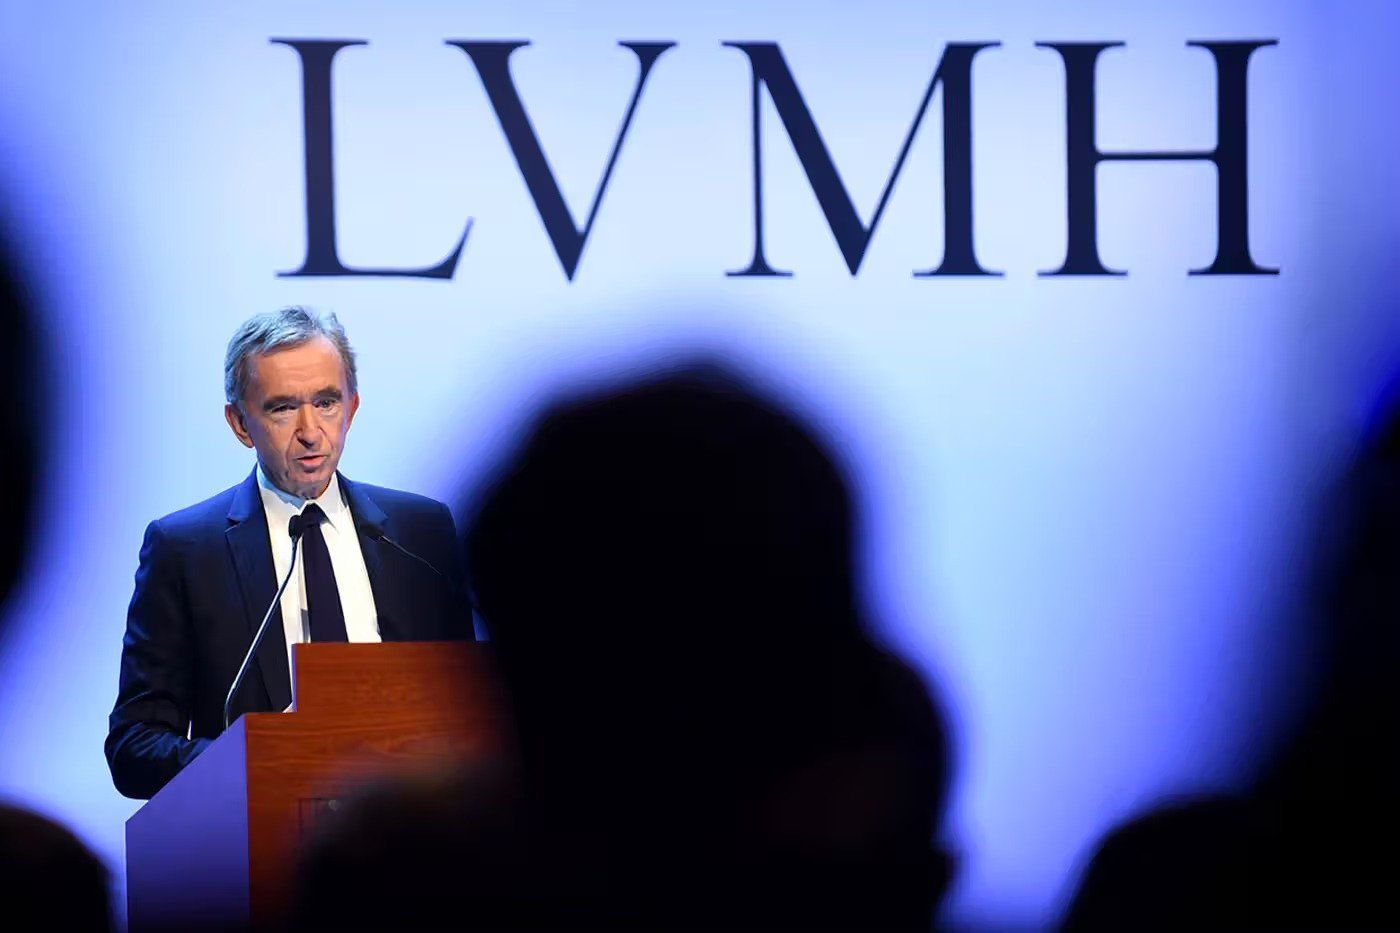 Luxury goods conglomerate LVMH is eyeing acquisition of Cartier, suggest  rumor mills - Luxurylaunches